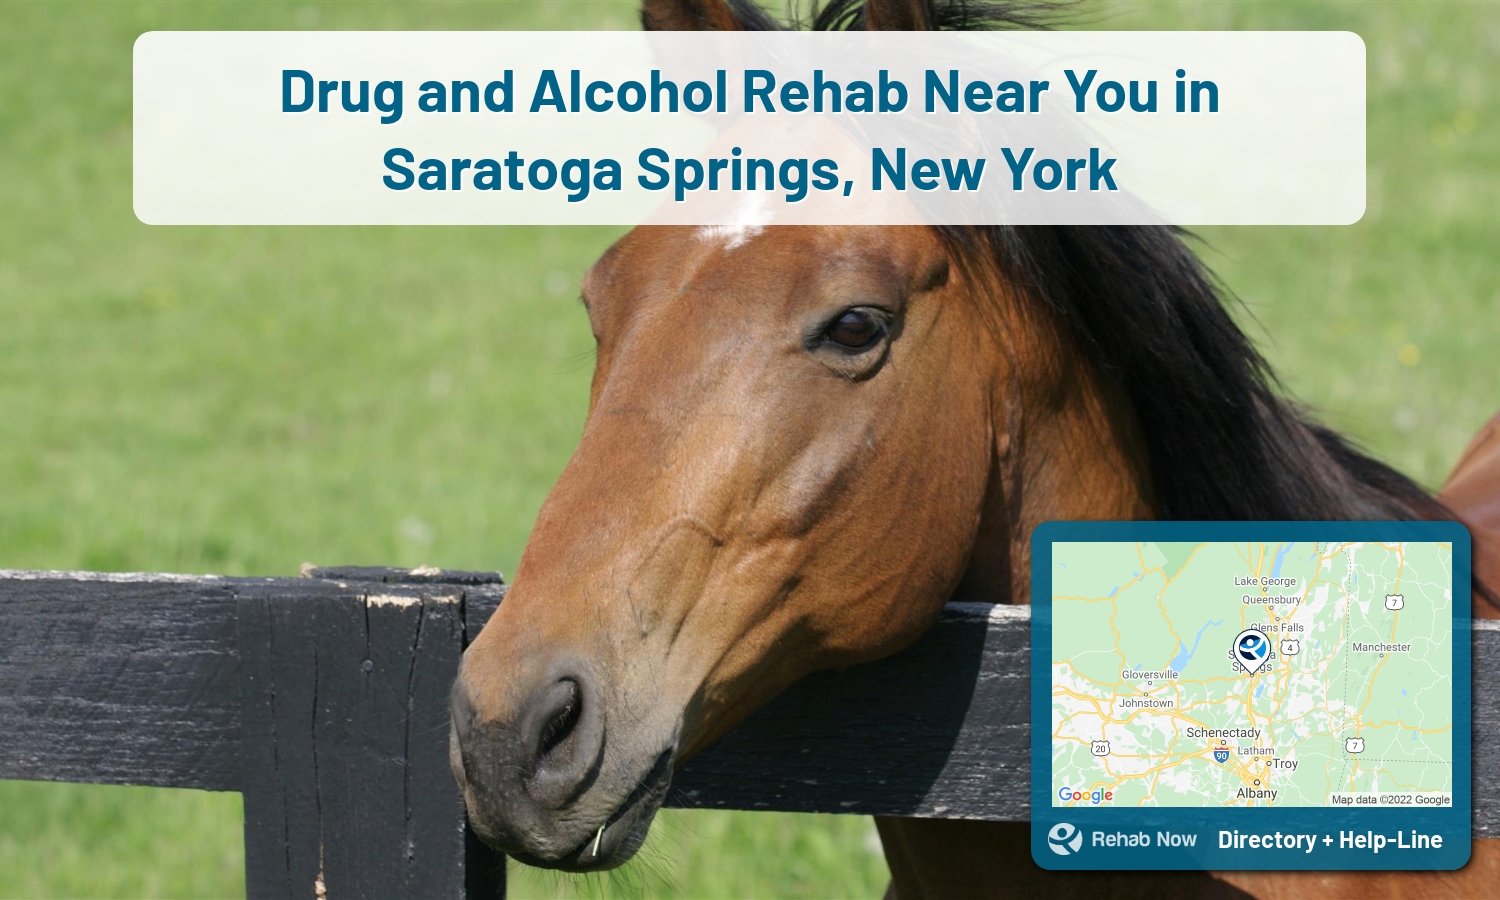 Our experts can help you find treatment now in Saratoga Springs, New York. We list drug rehab and alcohol centers in New York.